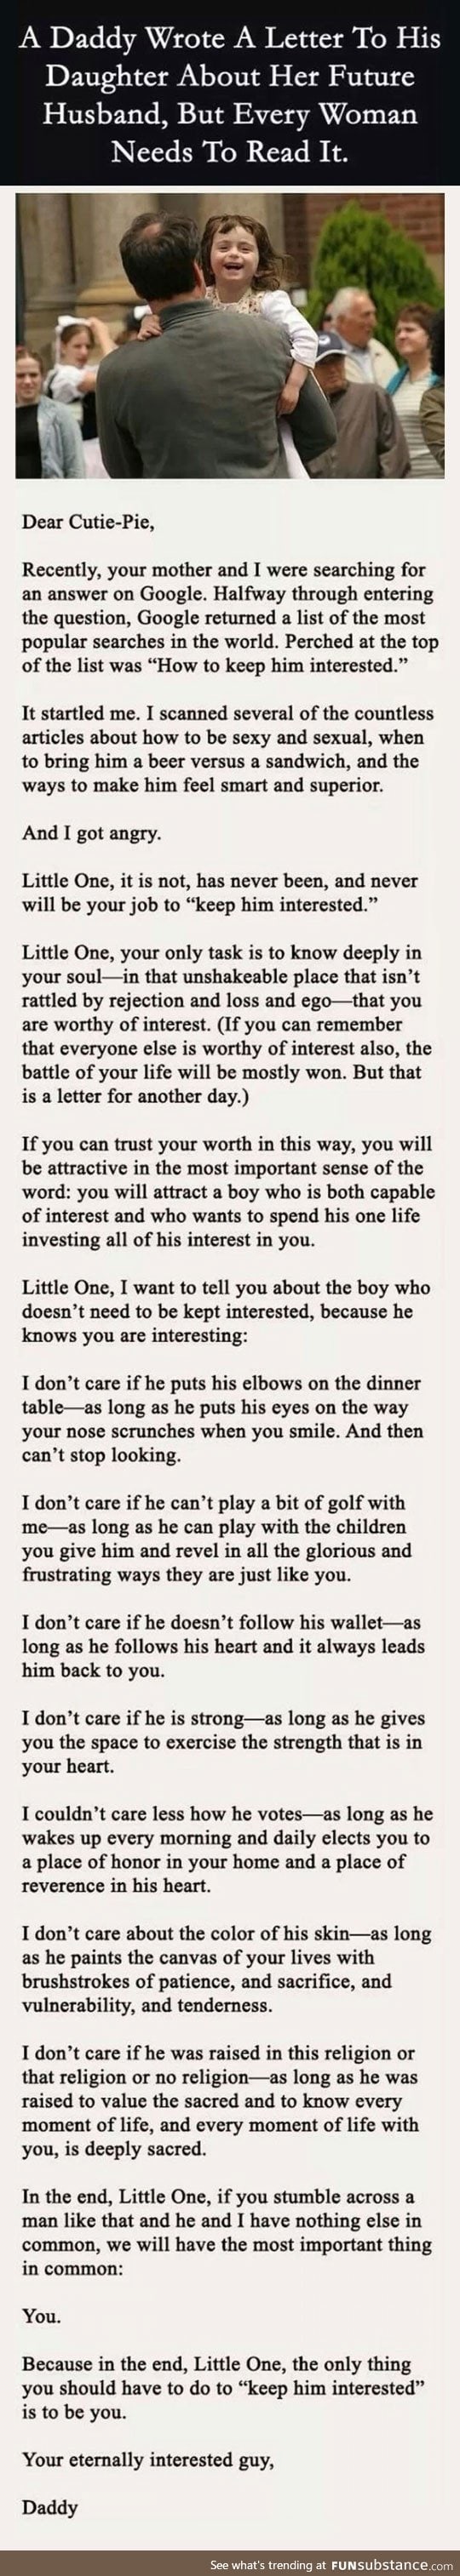 Letter from a father to his daughter